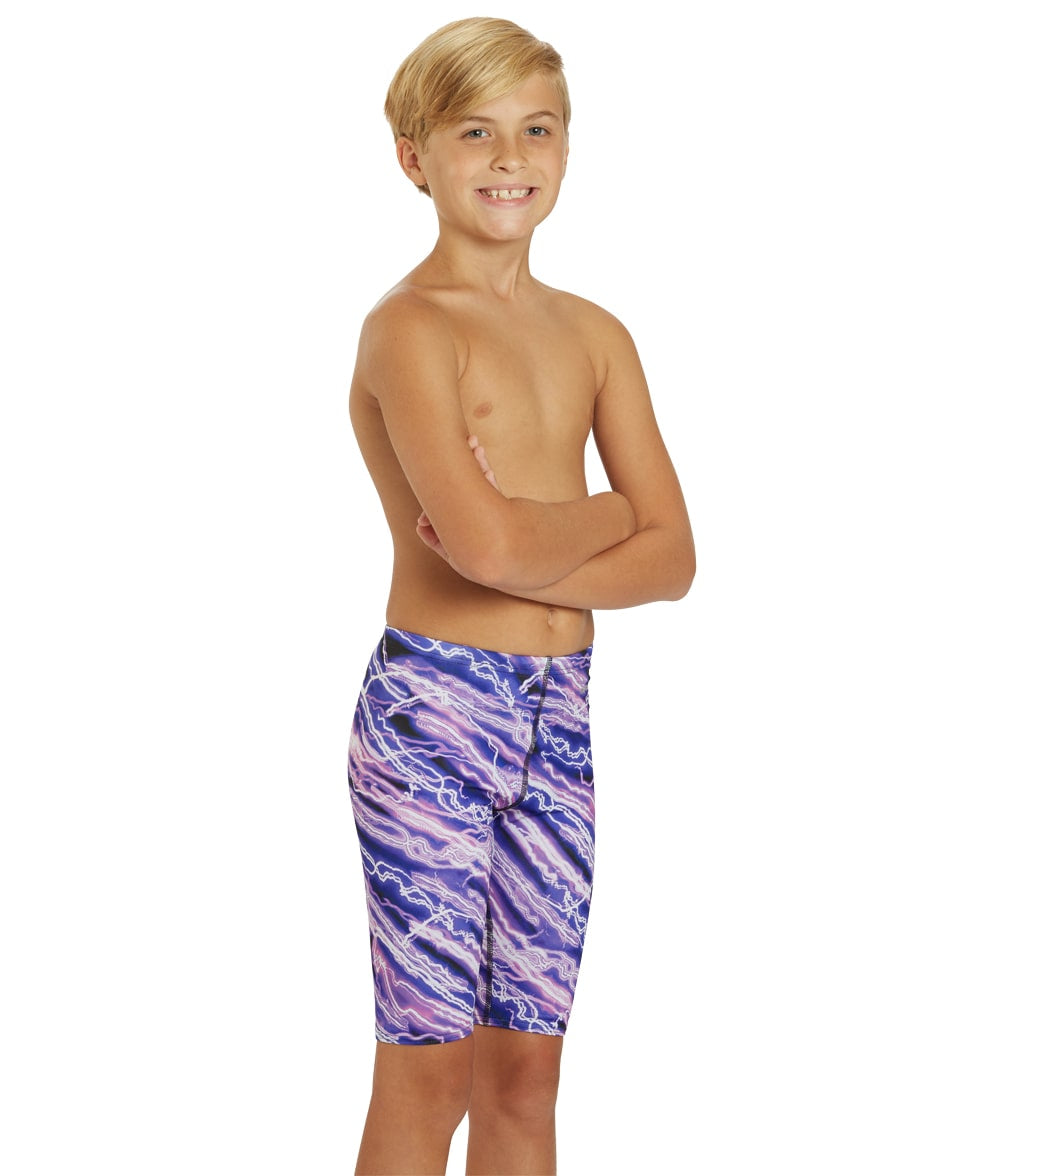 Sporti HydroLast Flash Jammer Swimsuit Youth (22-28)